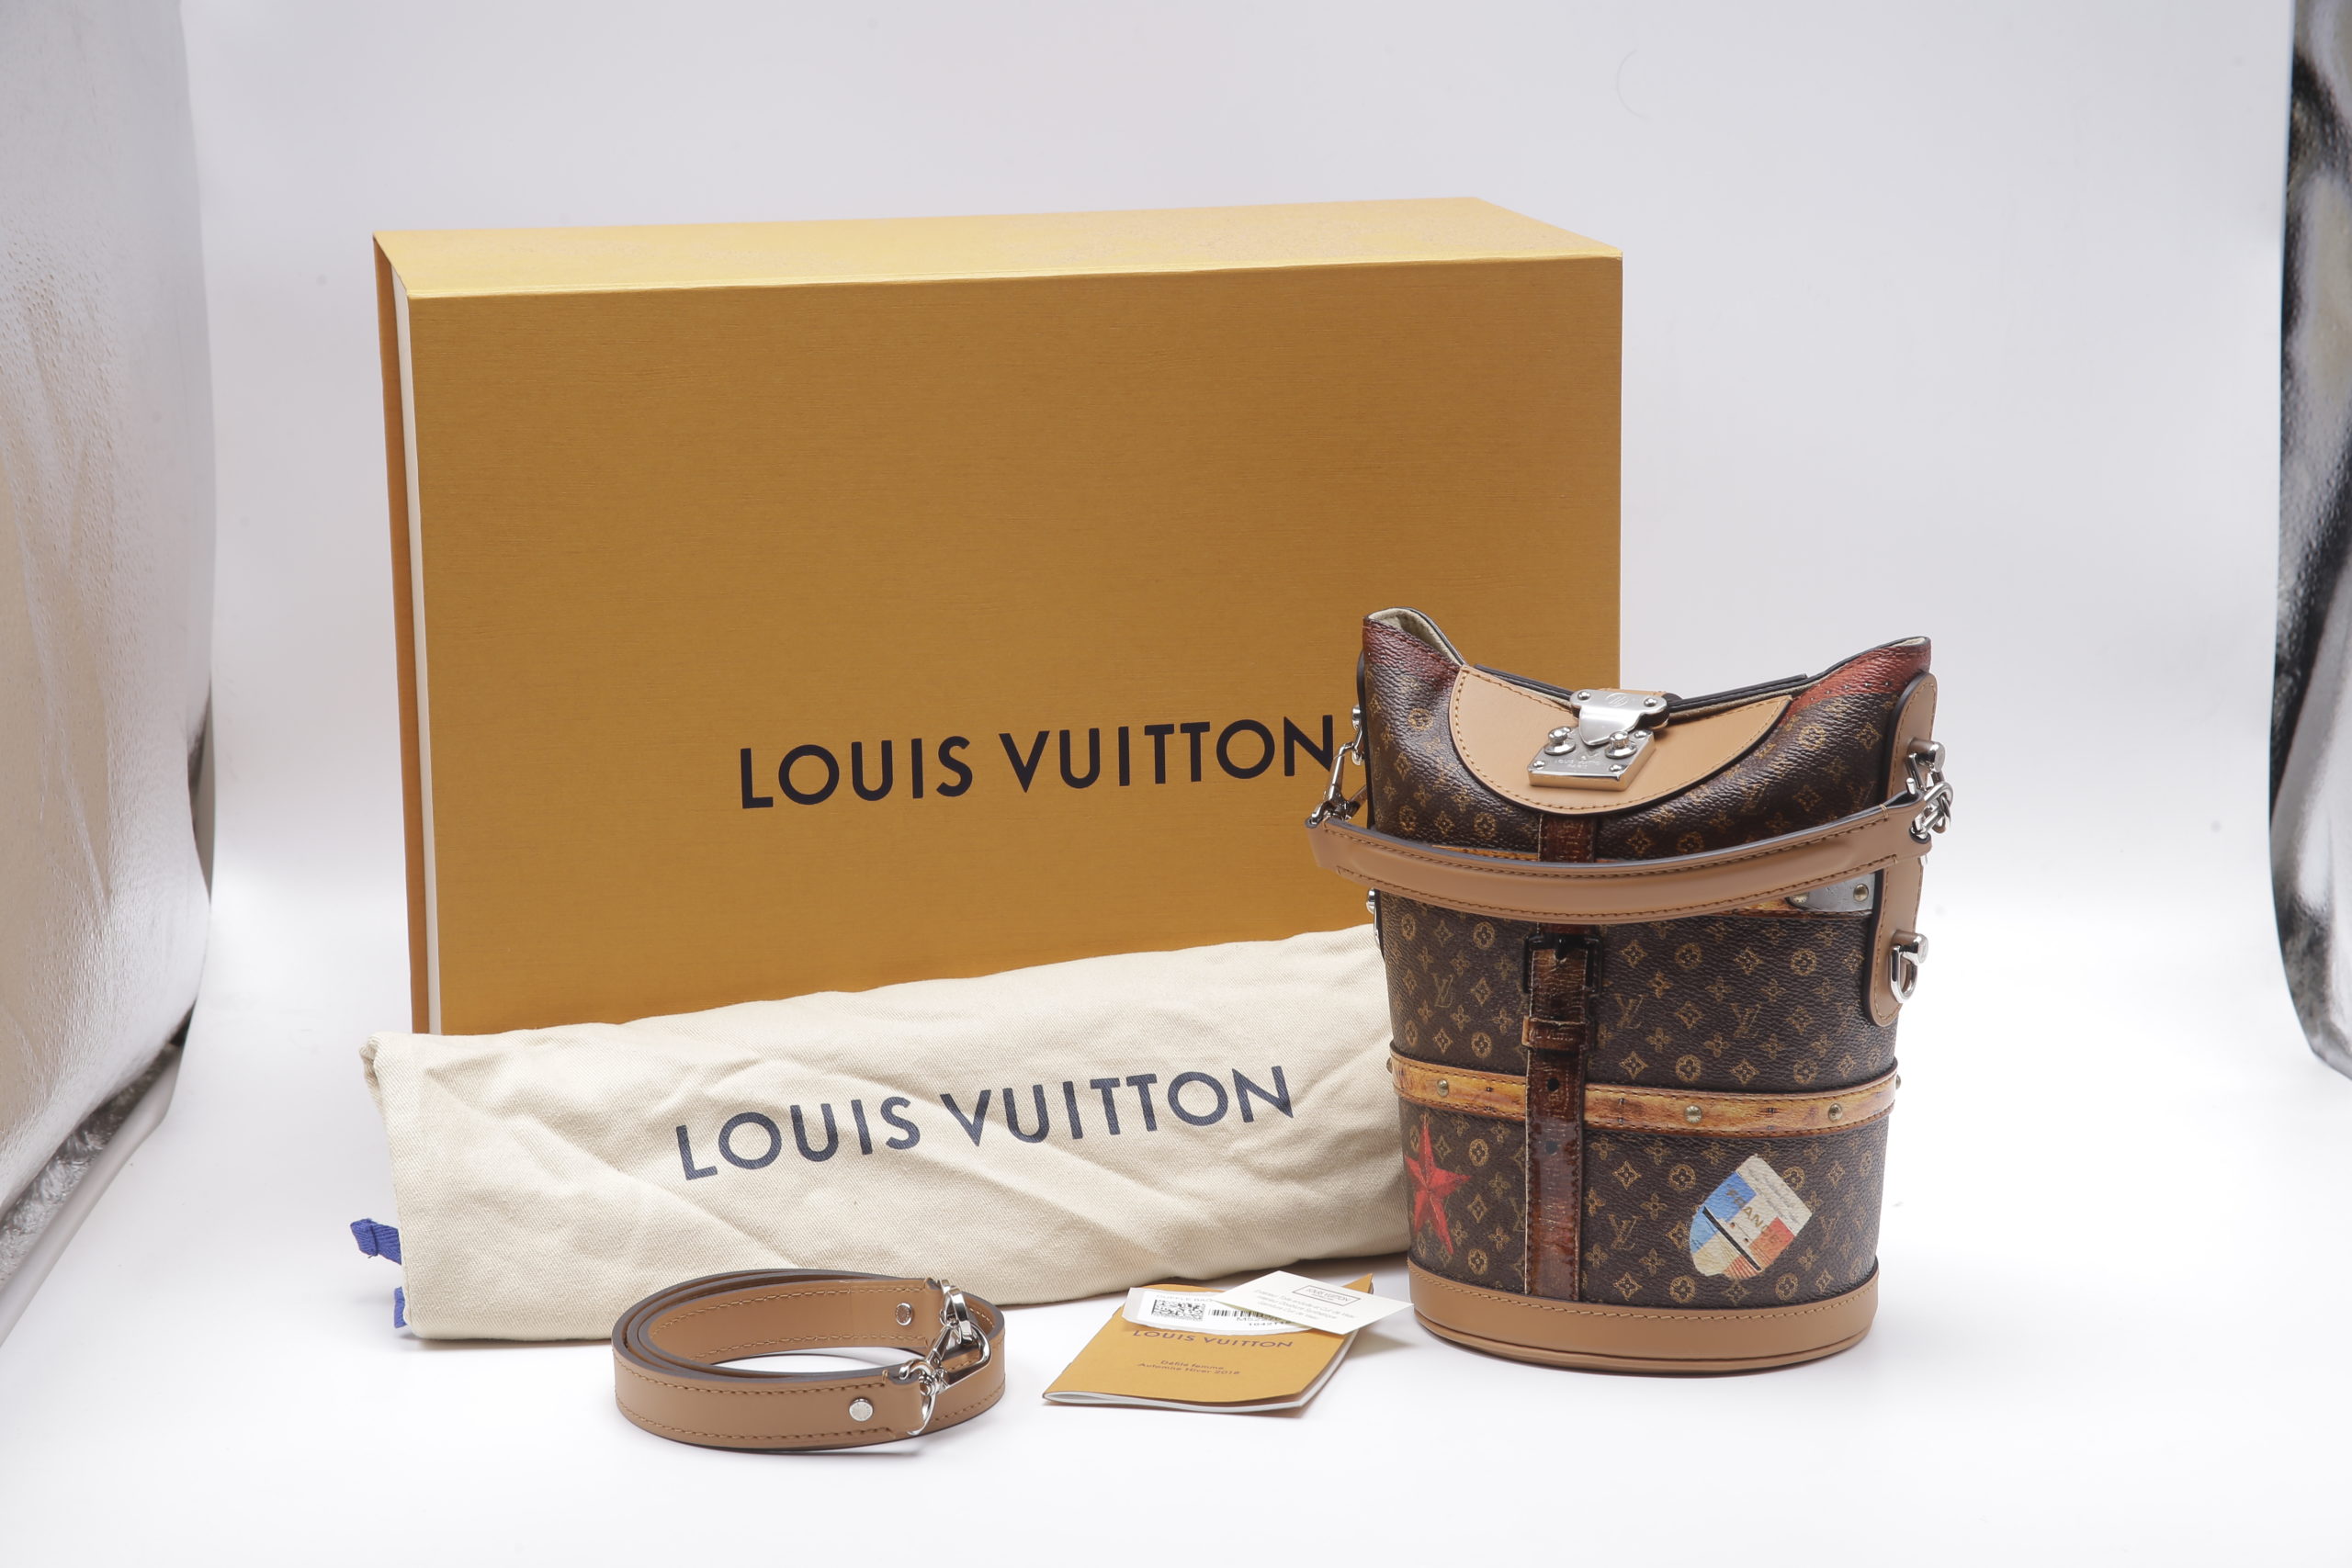 LOUIS VUITTON UNBOXING NEW COLLECTION SUMMER 2021 “PHONE ORDER “ 